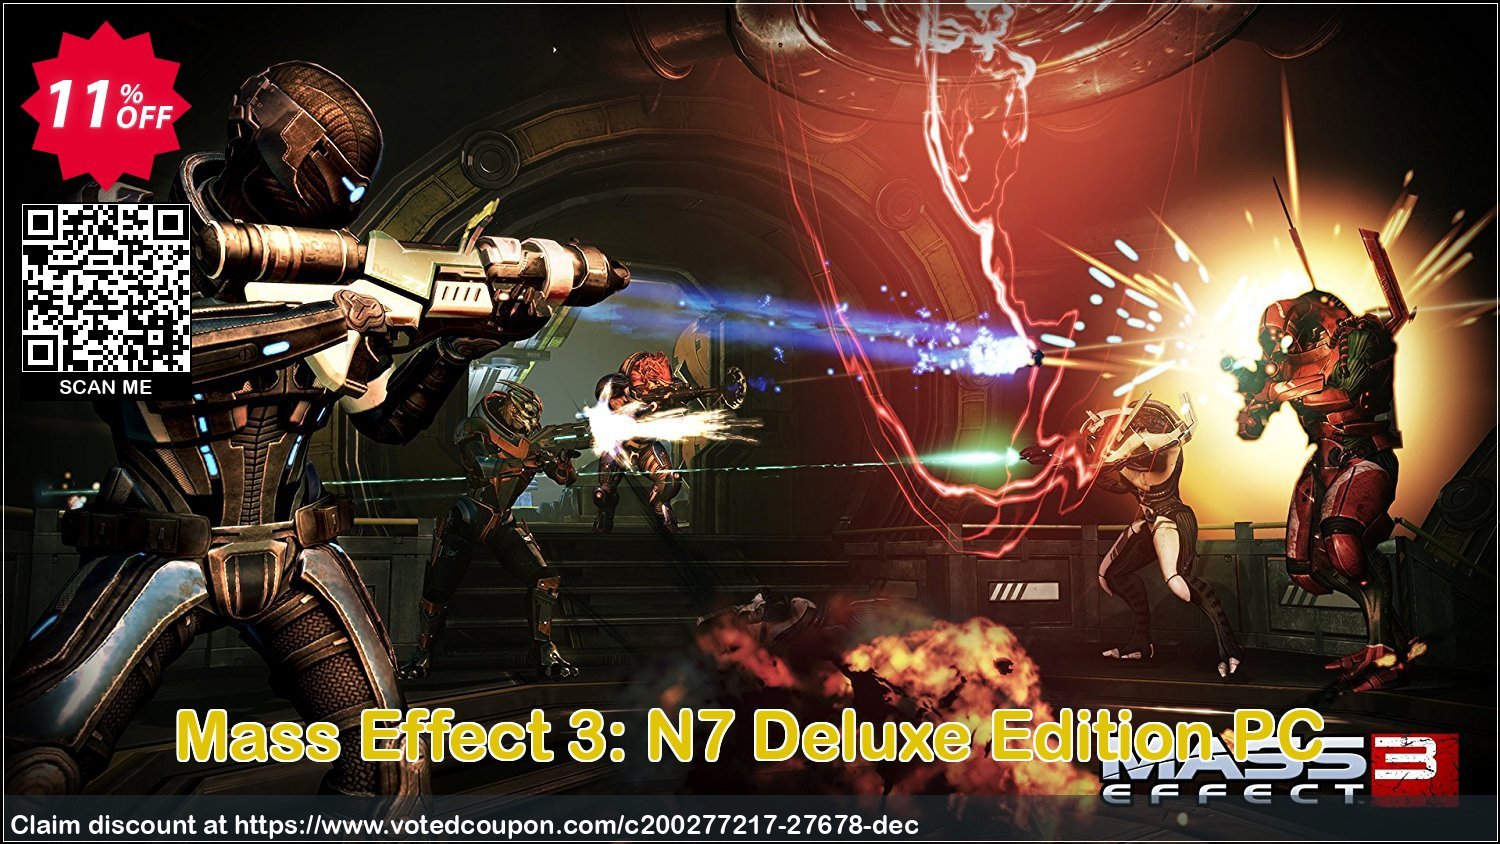 Mass Effect 3: N7 Deluxe Edition PC Coupon Code Apr 2024, 11% OFF - VotedCoupon